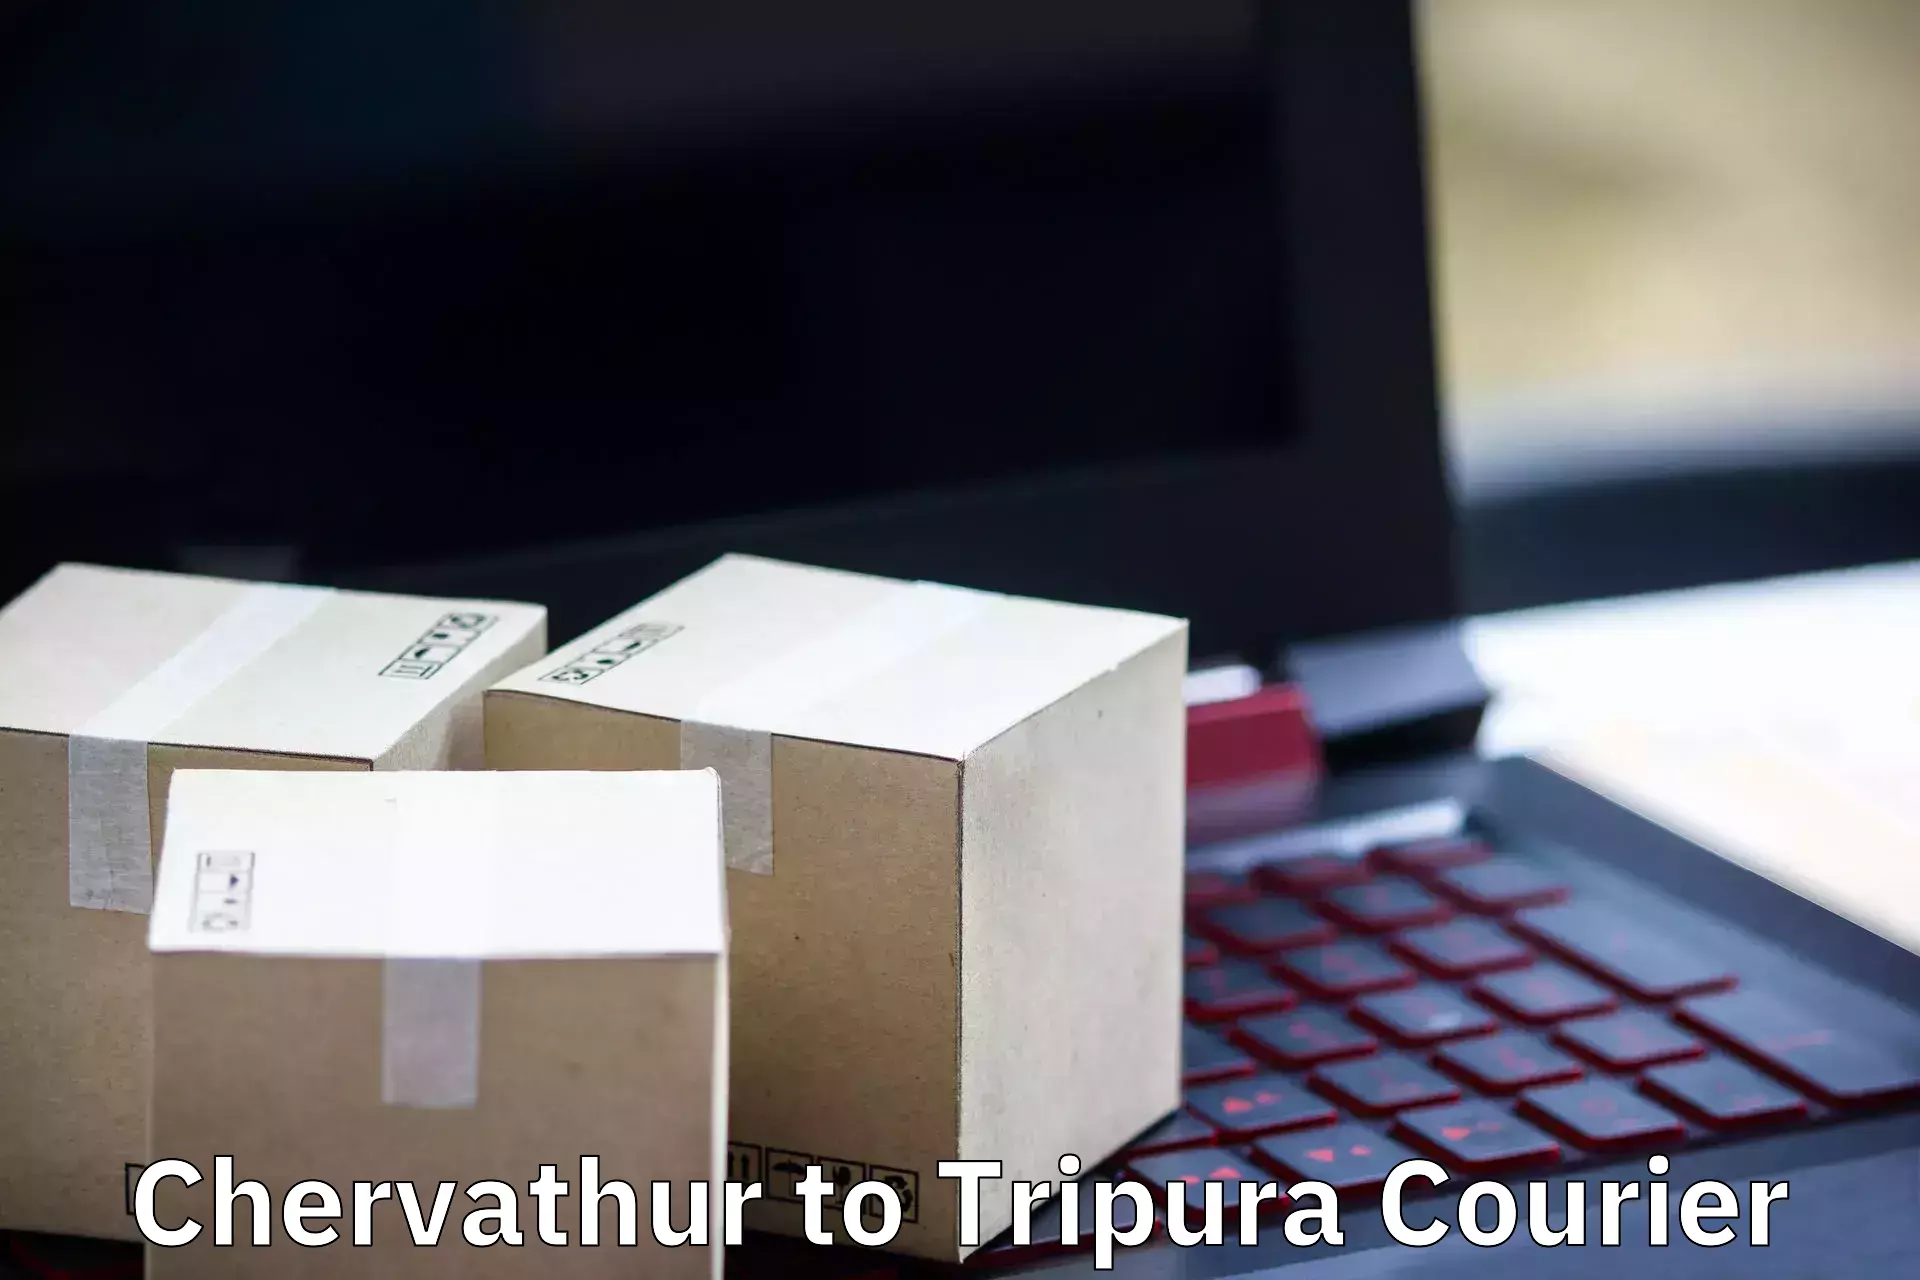 Expert goods movers Chervathur to Udaipur Tripura